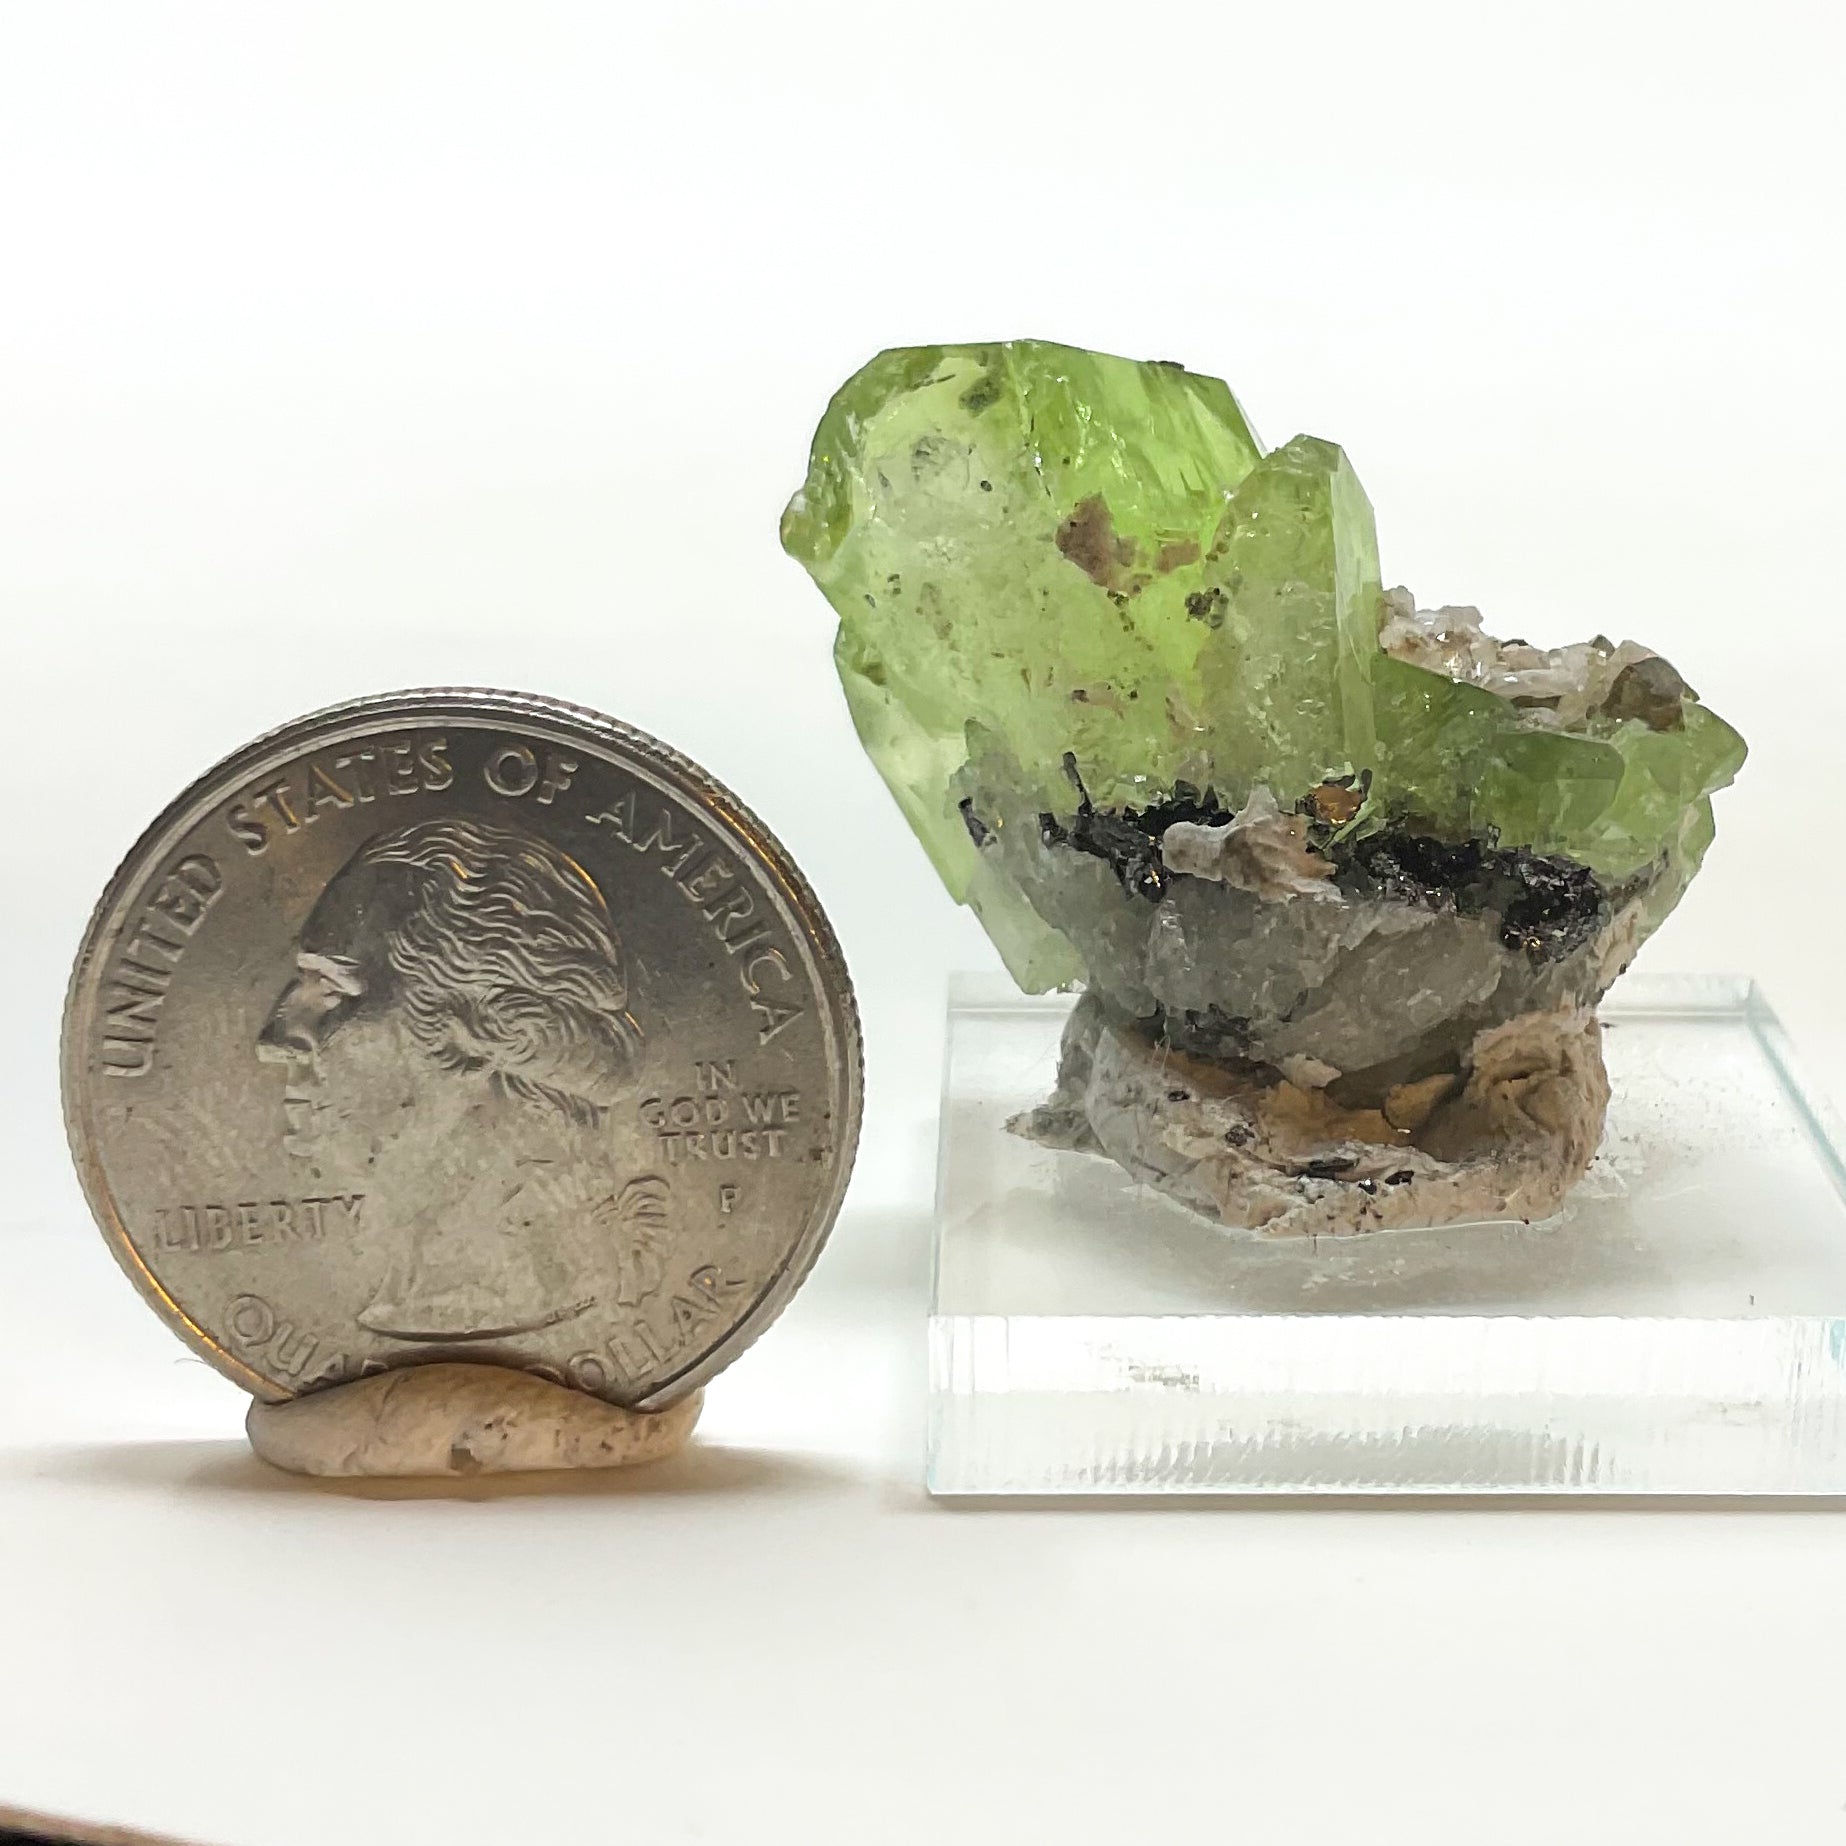 Chrome Diopside from the Merlani Hills in Arusha, Tanzania